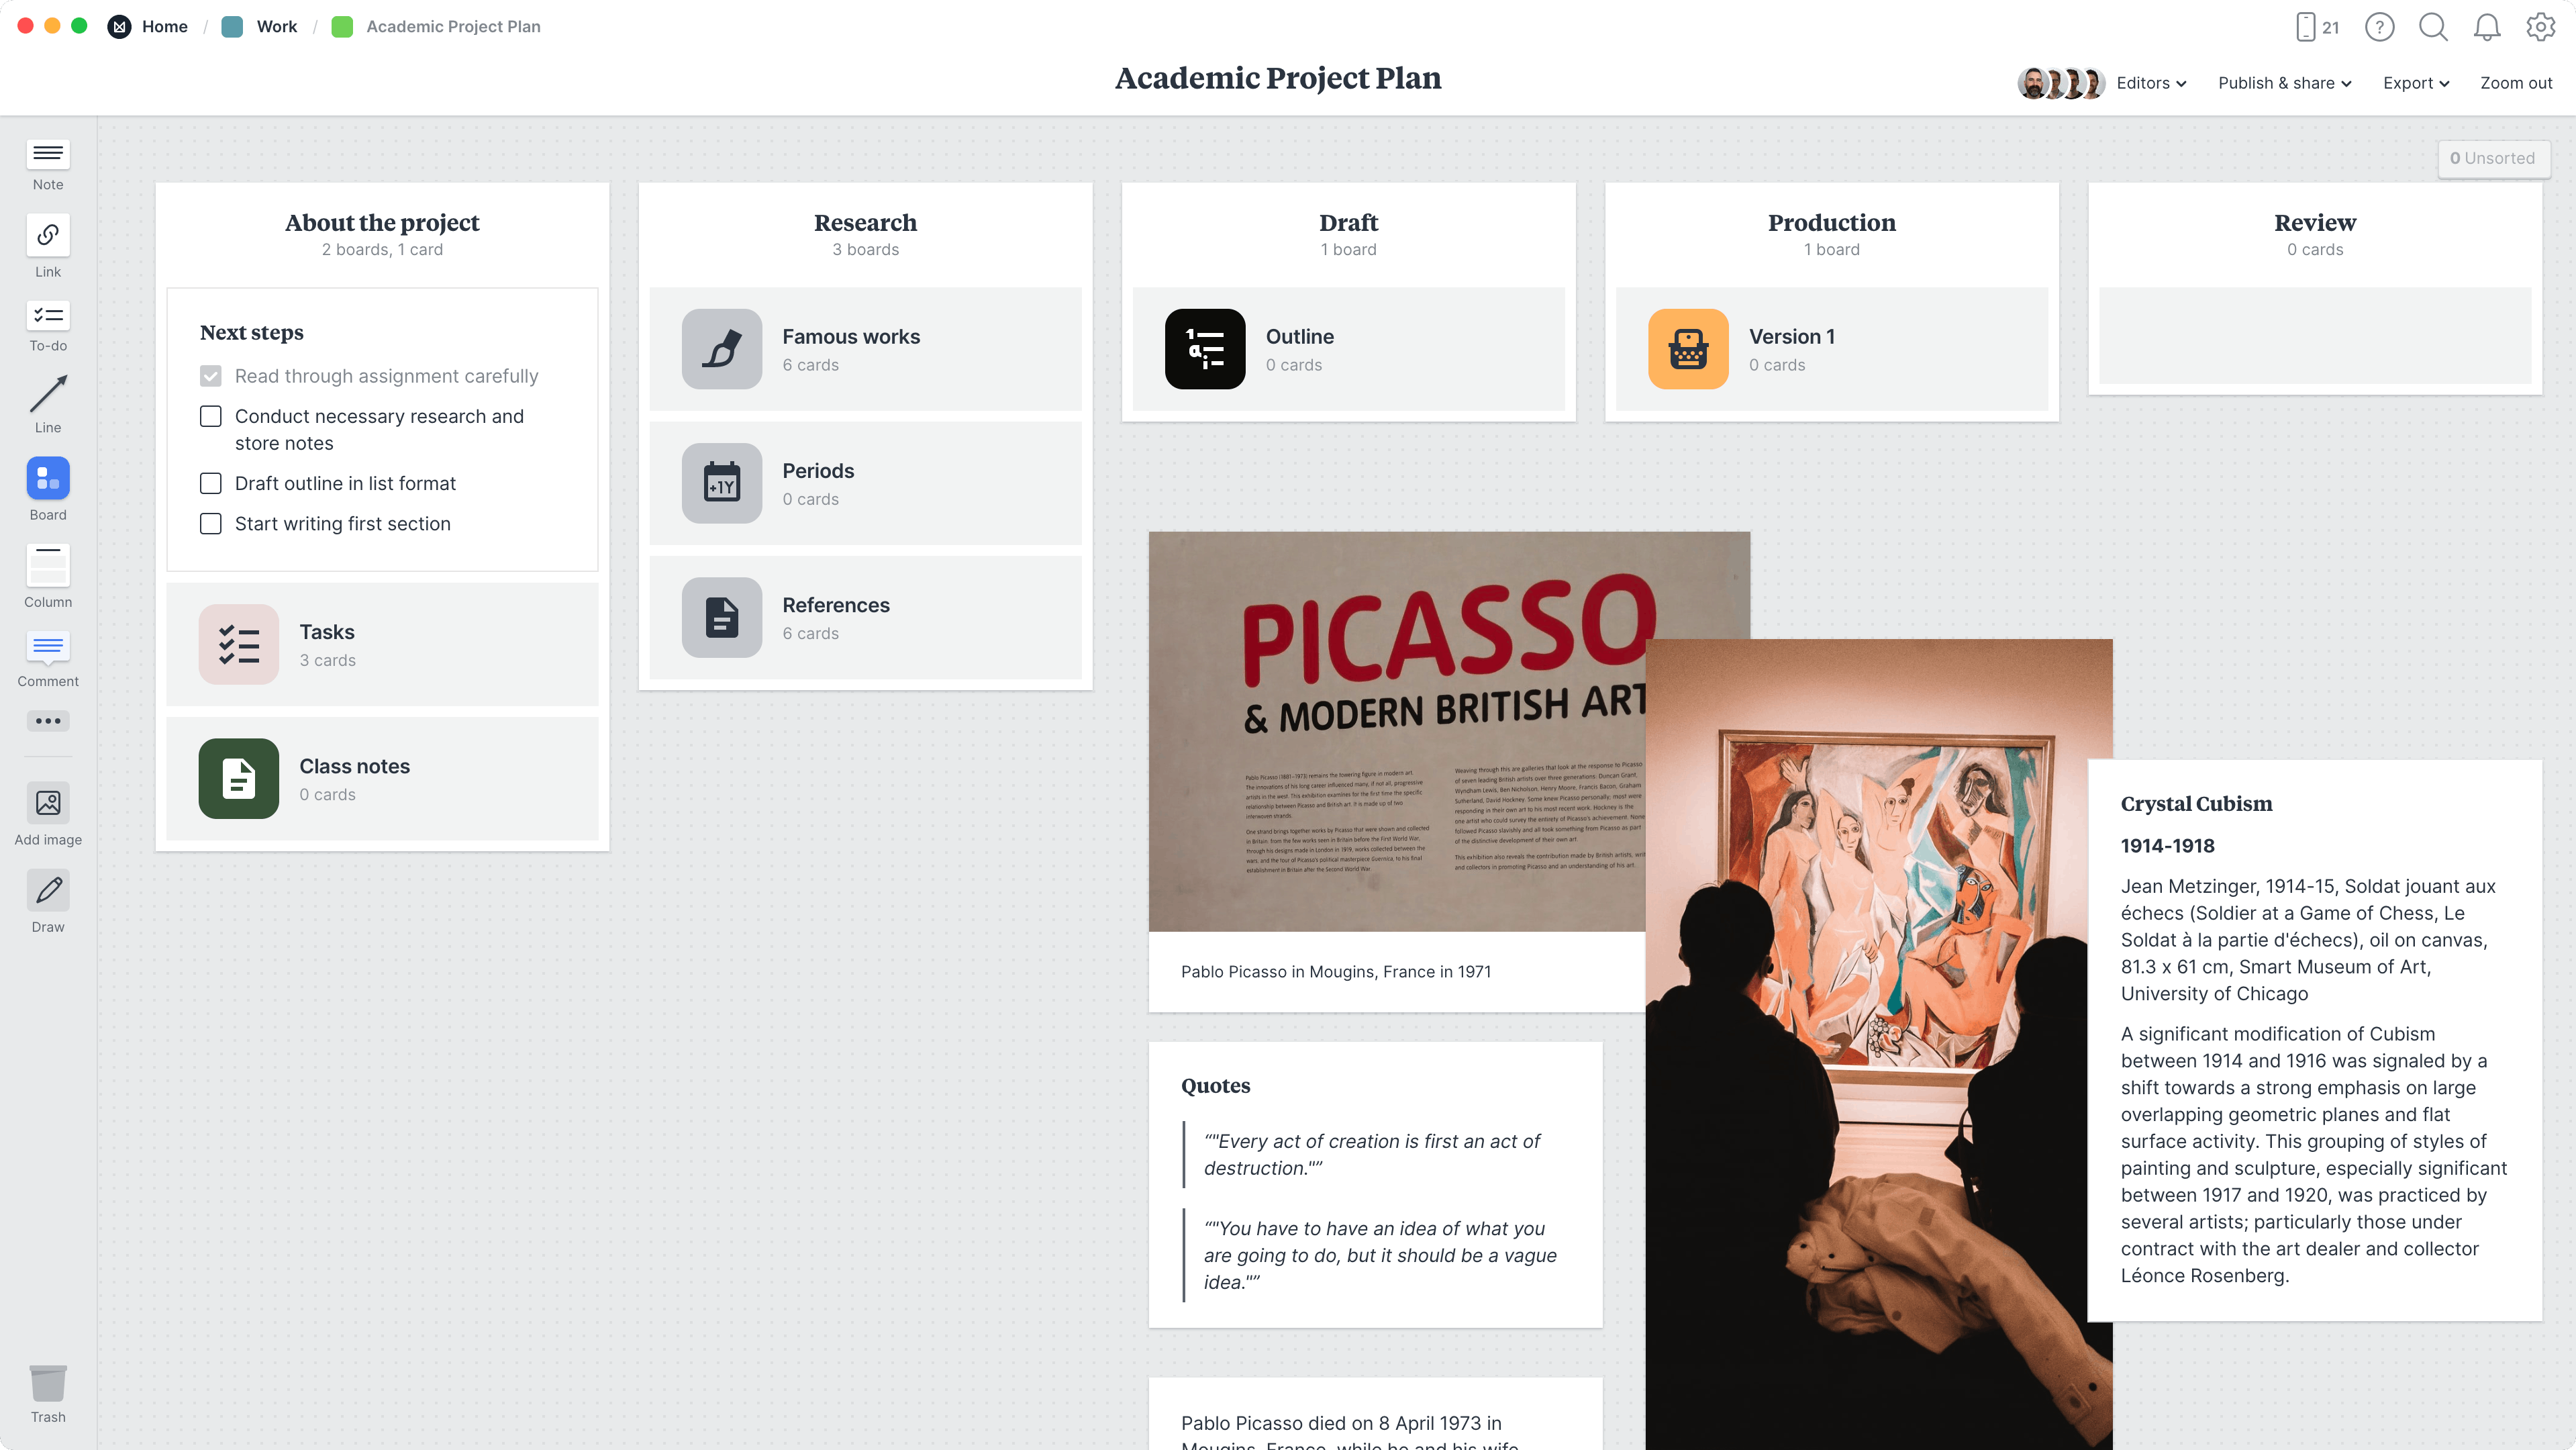 Illustration Moodboard Template & Example - Milanote